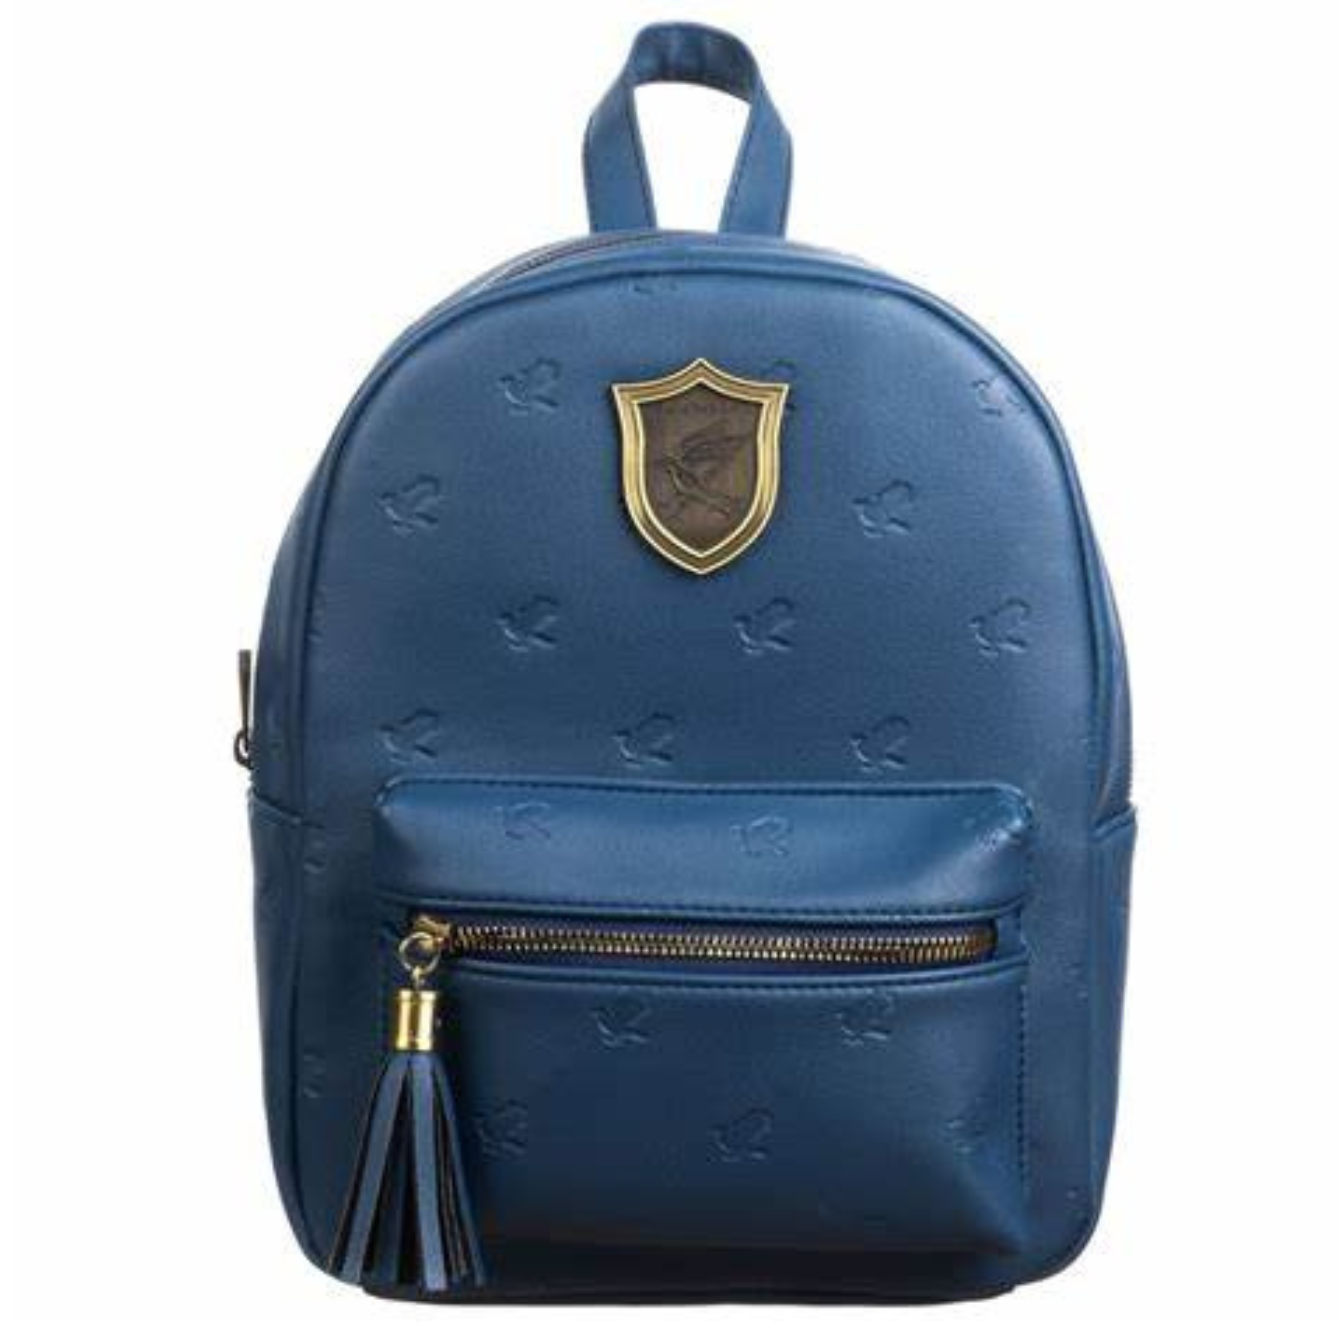 Ravenclaw Hogwarts House Harry Potter Mini Backpack by Bioworld